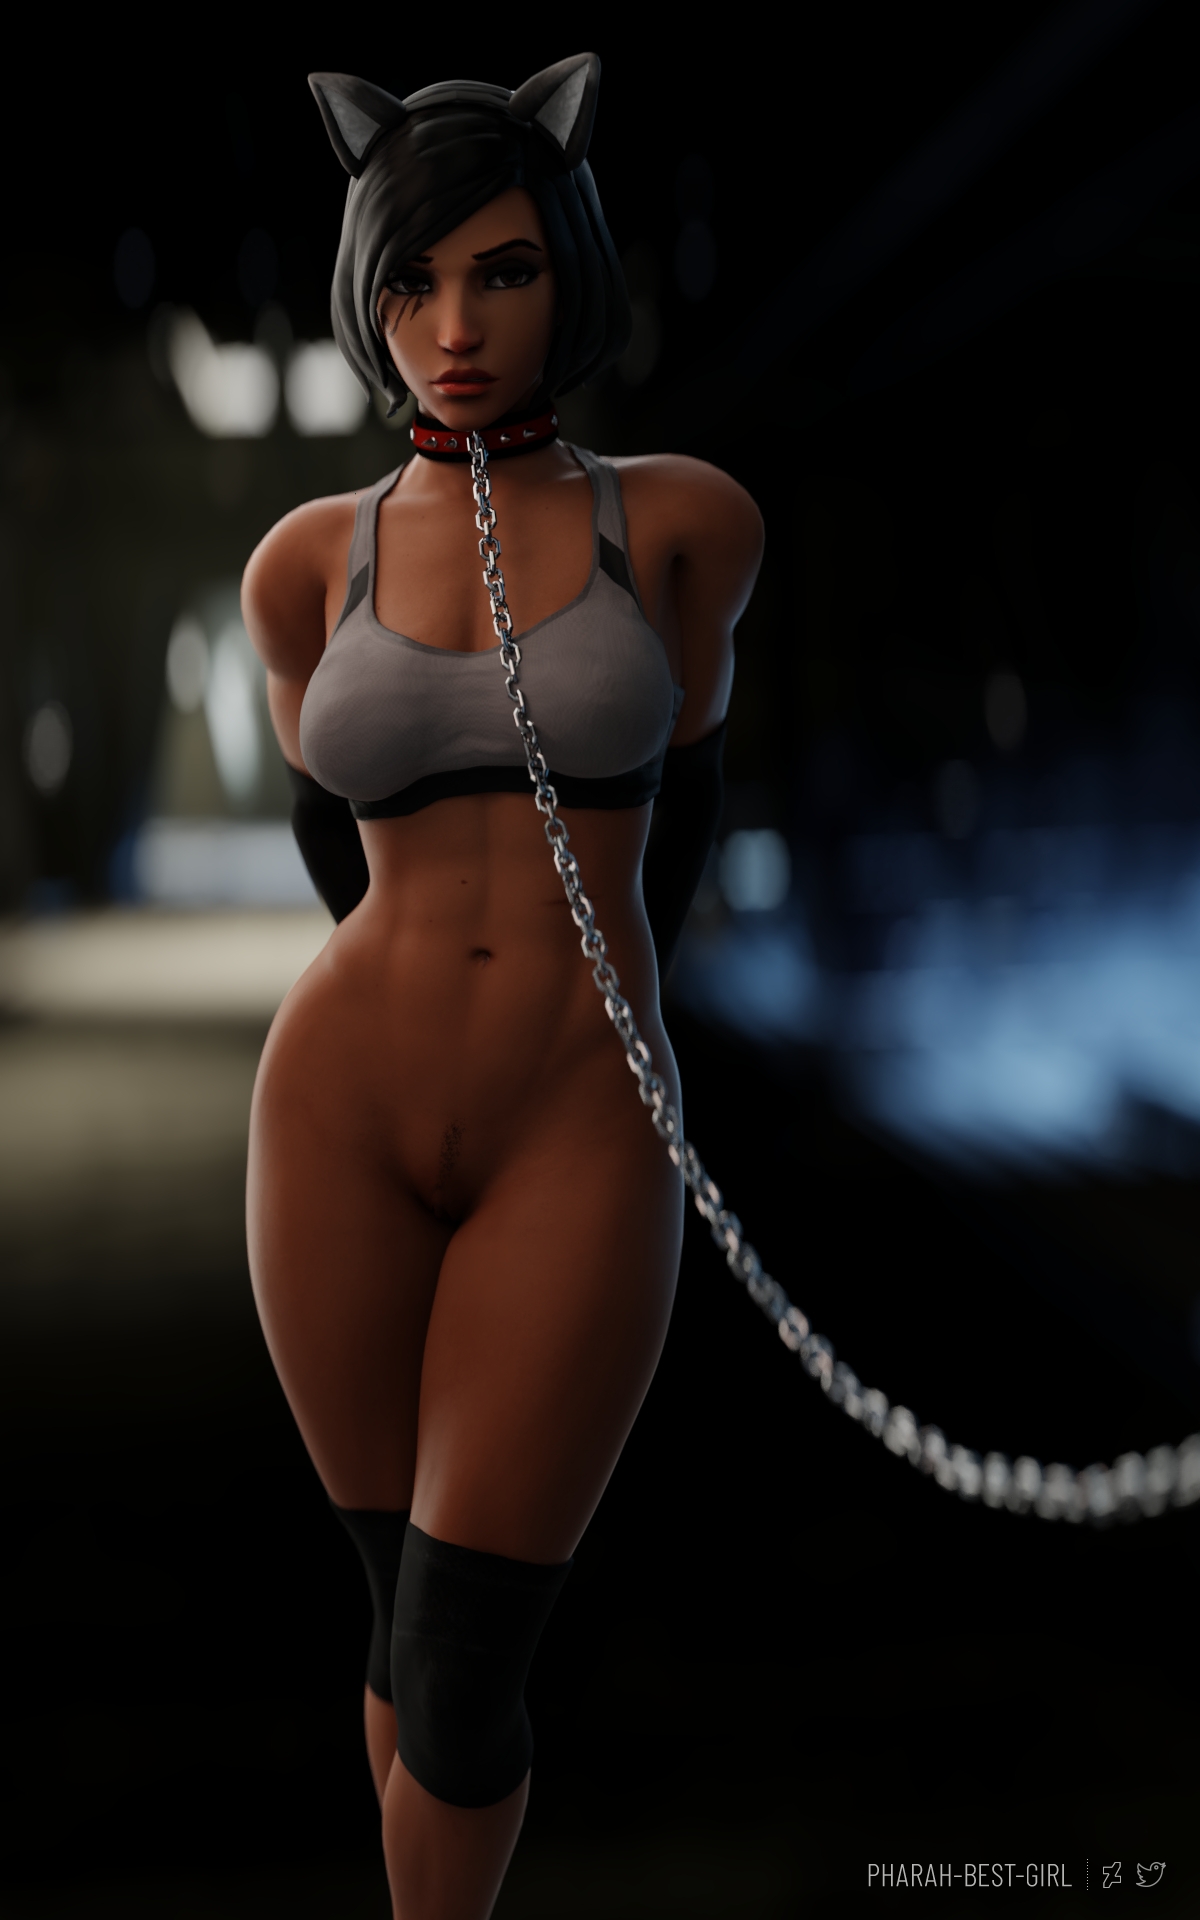 Pin up 66 Pharah Overwatch 3d Porn Sexy Nude Natural Boobs Abs Pussy Pubic Hair Hairy Pussy Domination Chained Rope Bondage 4